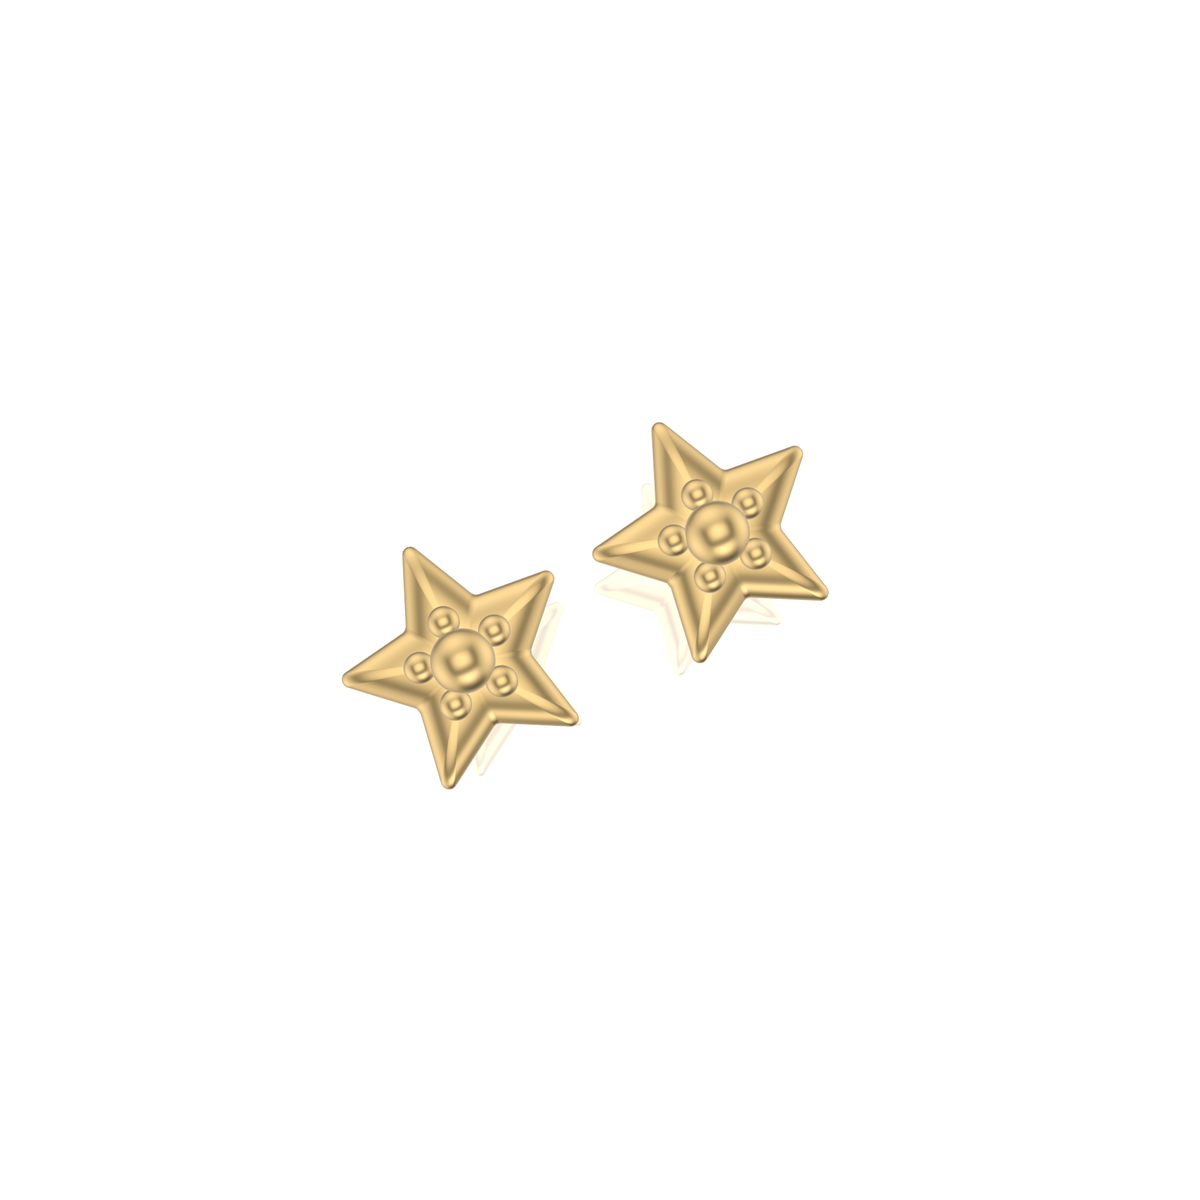 Little Star Studded Earrings  | Gold Studs | Choose Your Metal